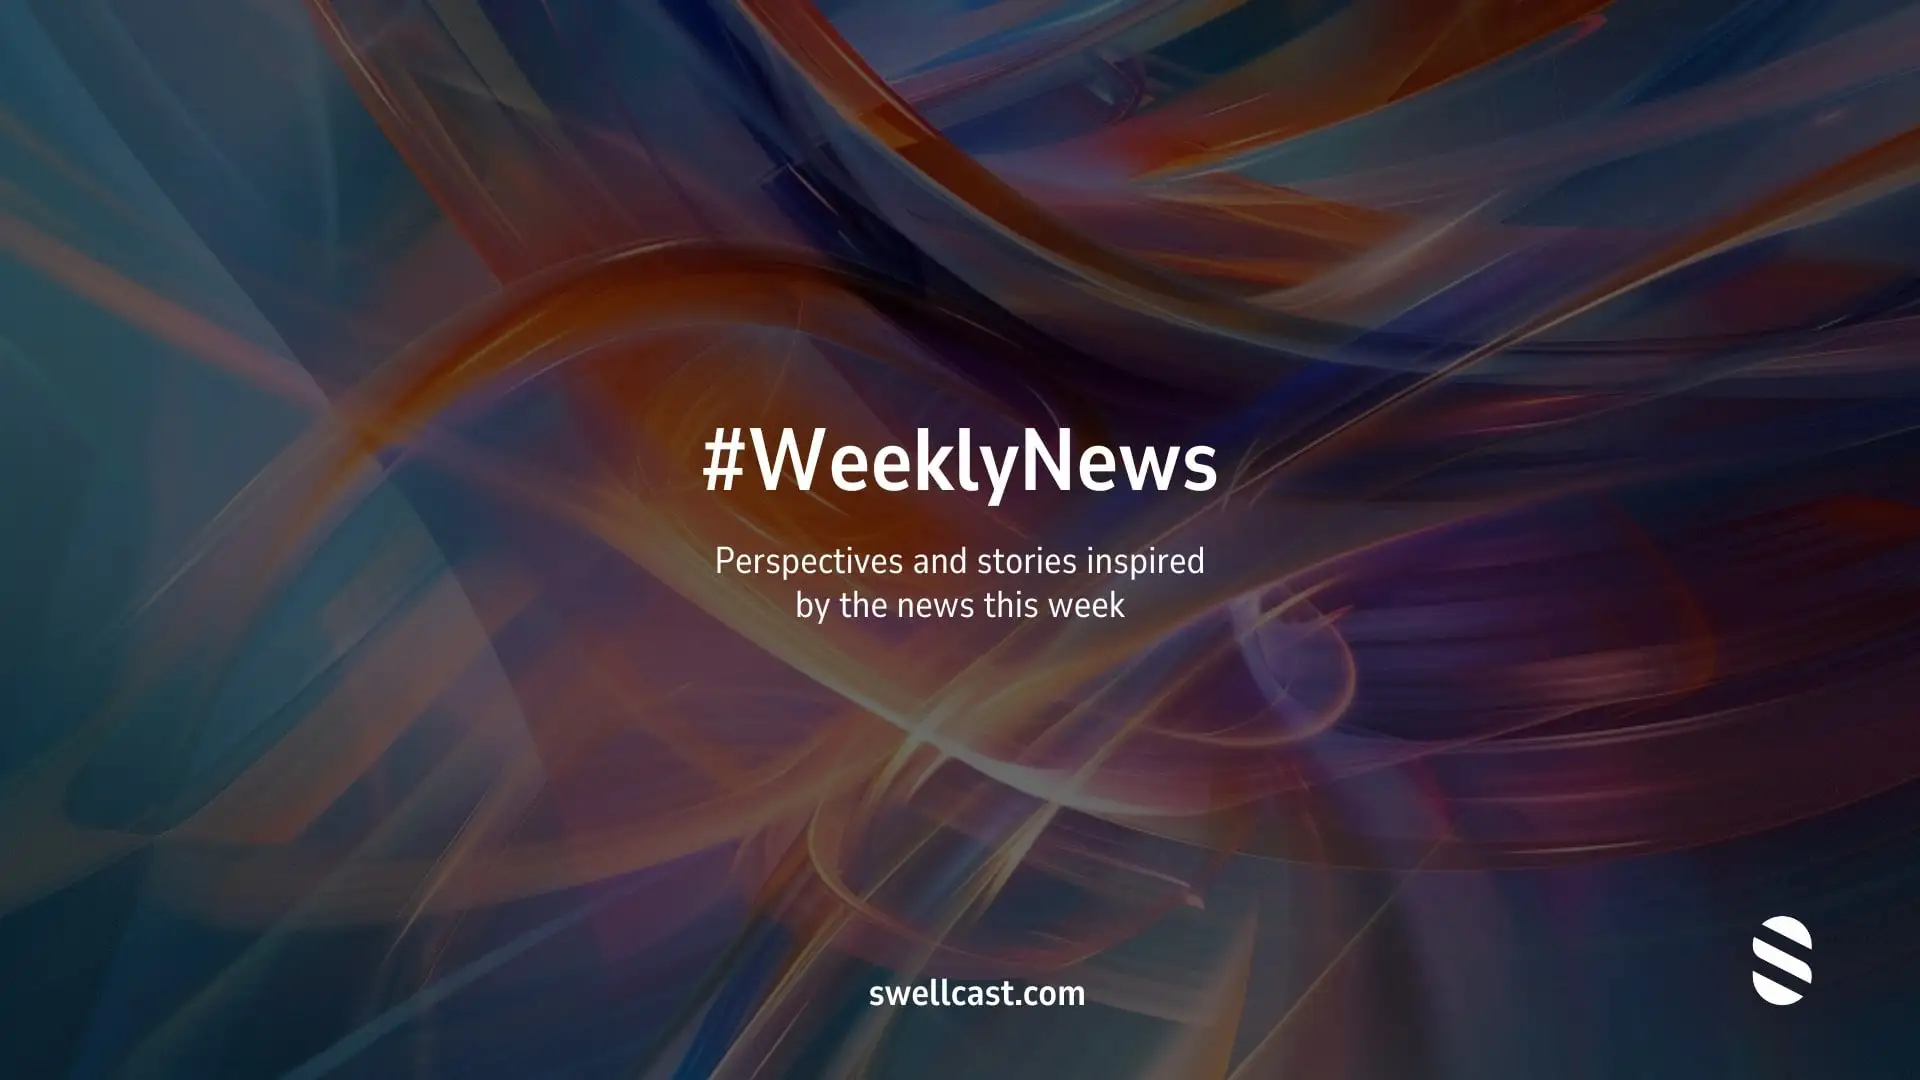 #WeeklyNews Feb 16 | Prompts for stories and perspectives based on the news